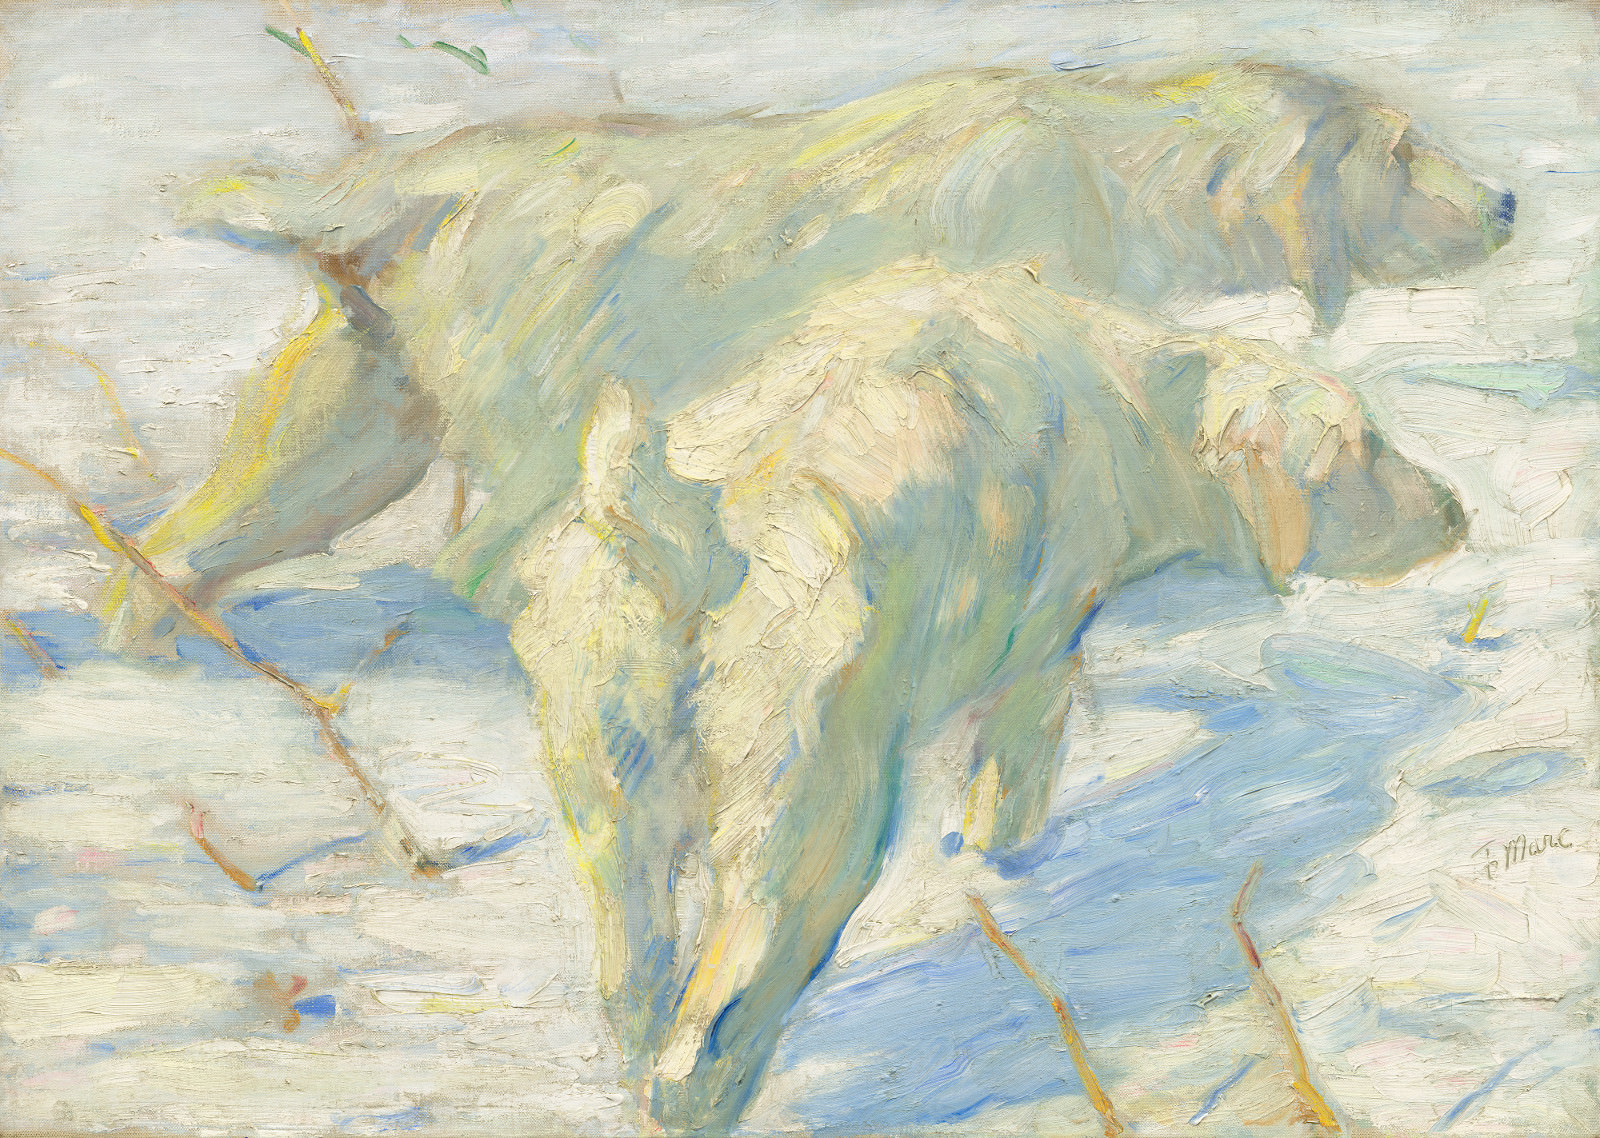 Fig. 11 – Siberian Dogs in the Snow, Franz Marc, 1909/1910, oil on canvas, 80,5 x 114 cm. National Gallery of Art, Washington. Gift of Mr. and Mrs. Stephen M. Kellen.